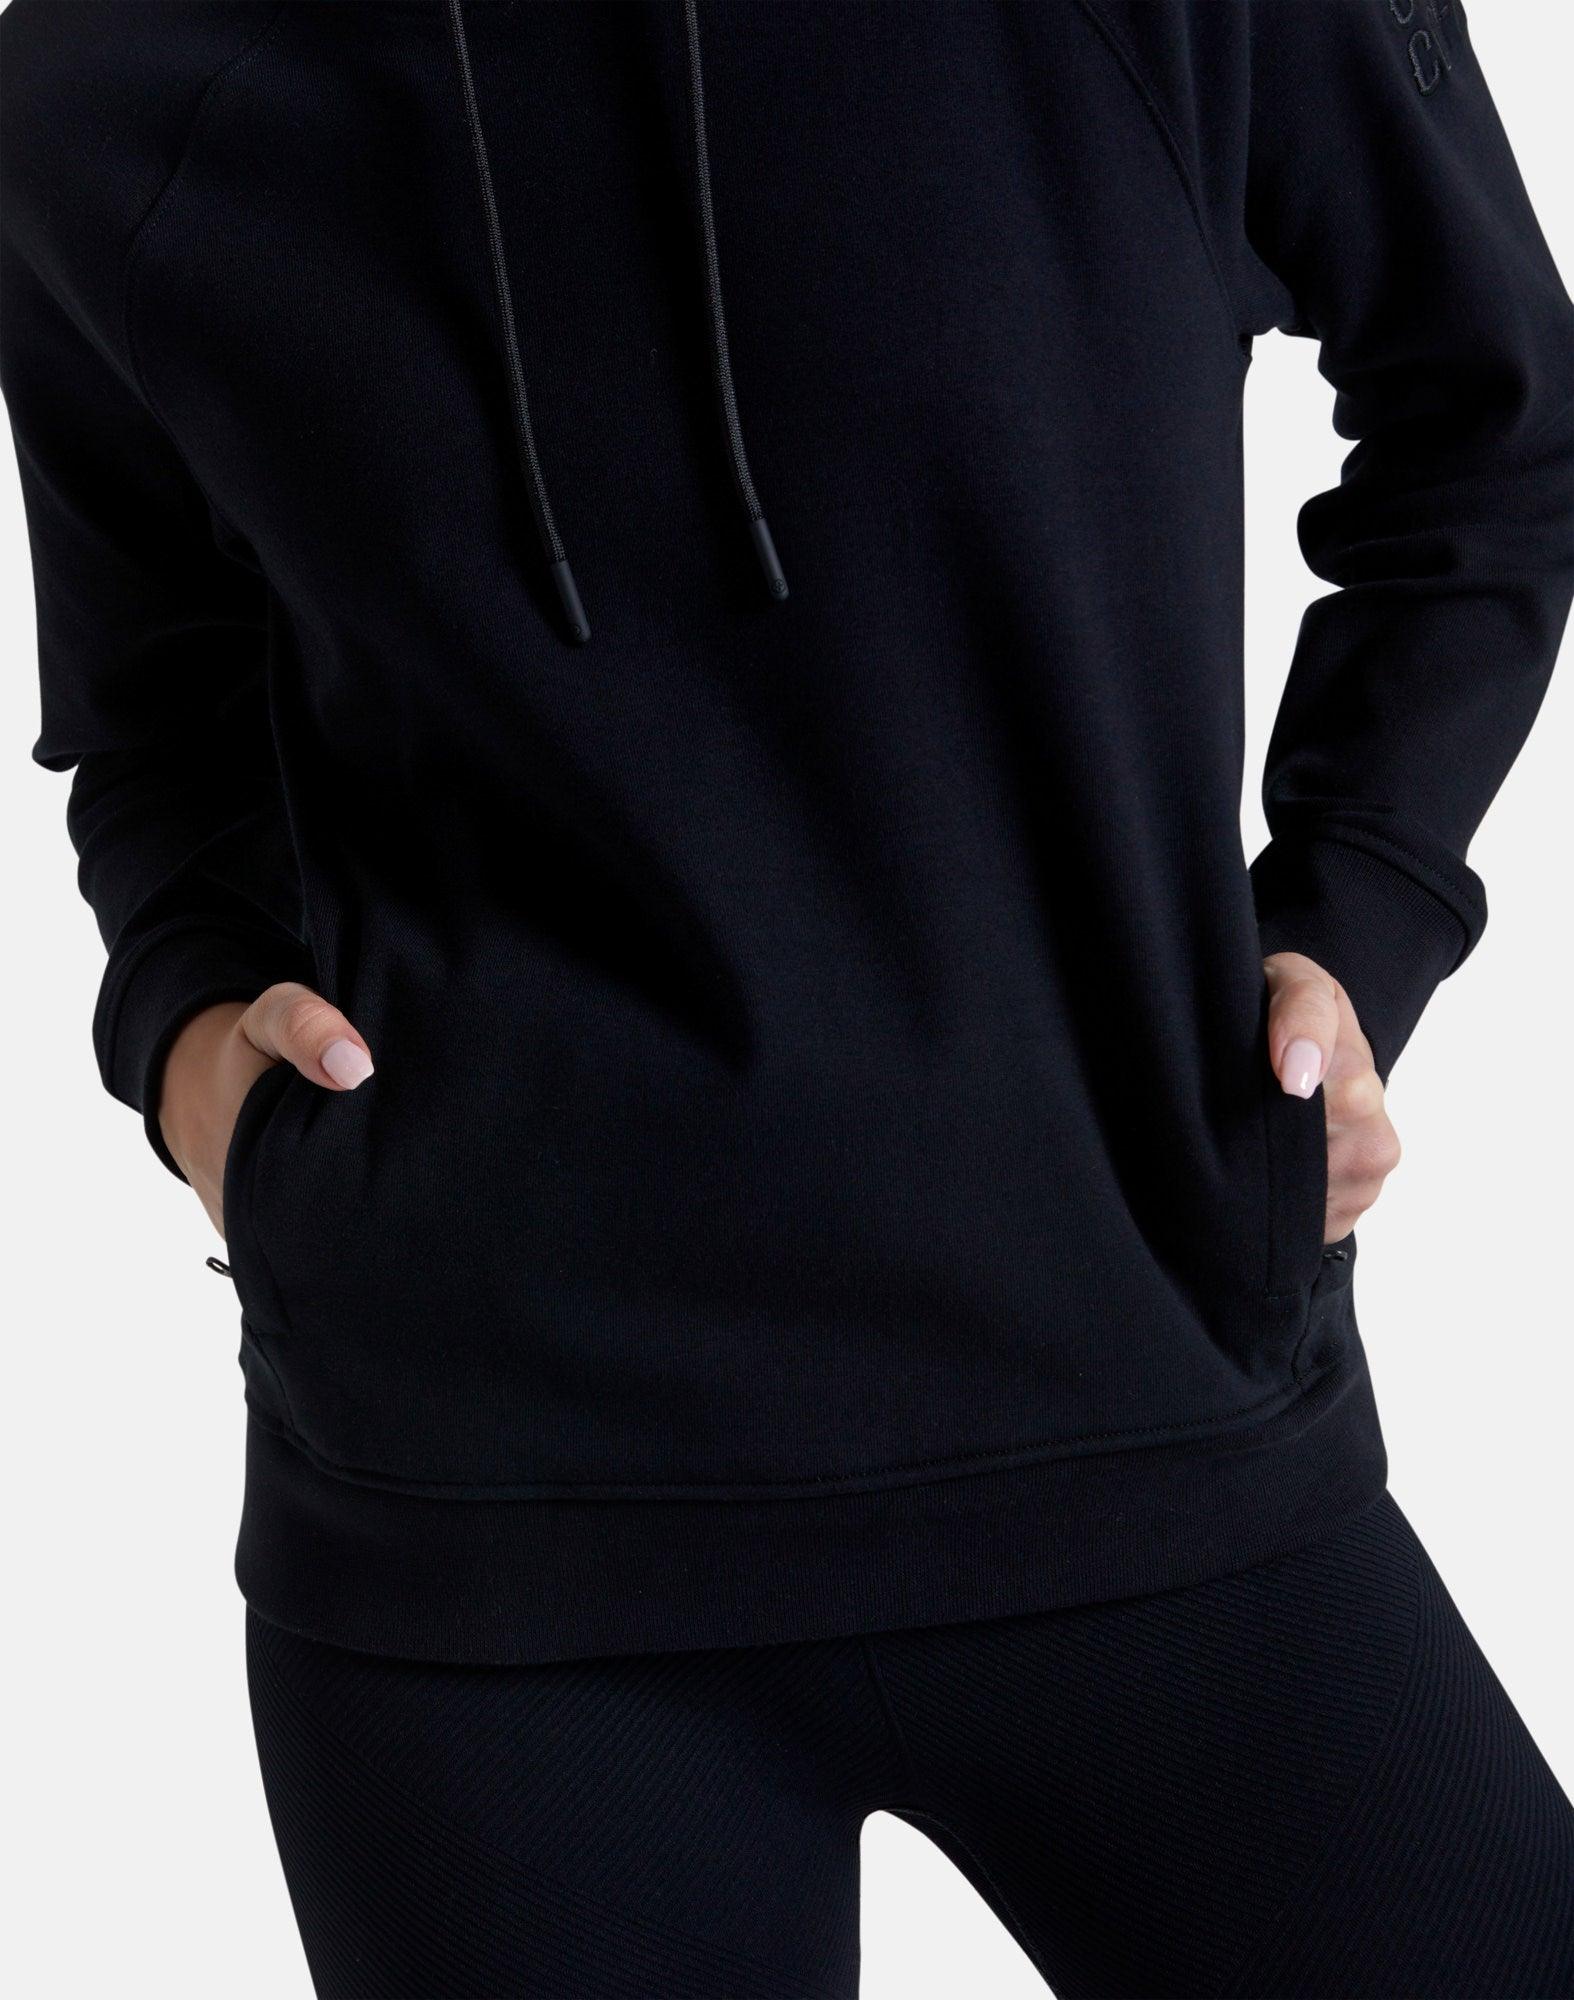 Chill Hoodie in Black